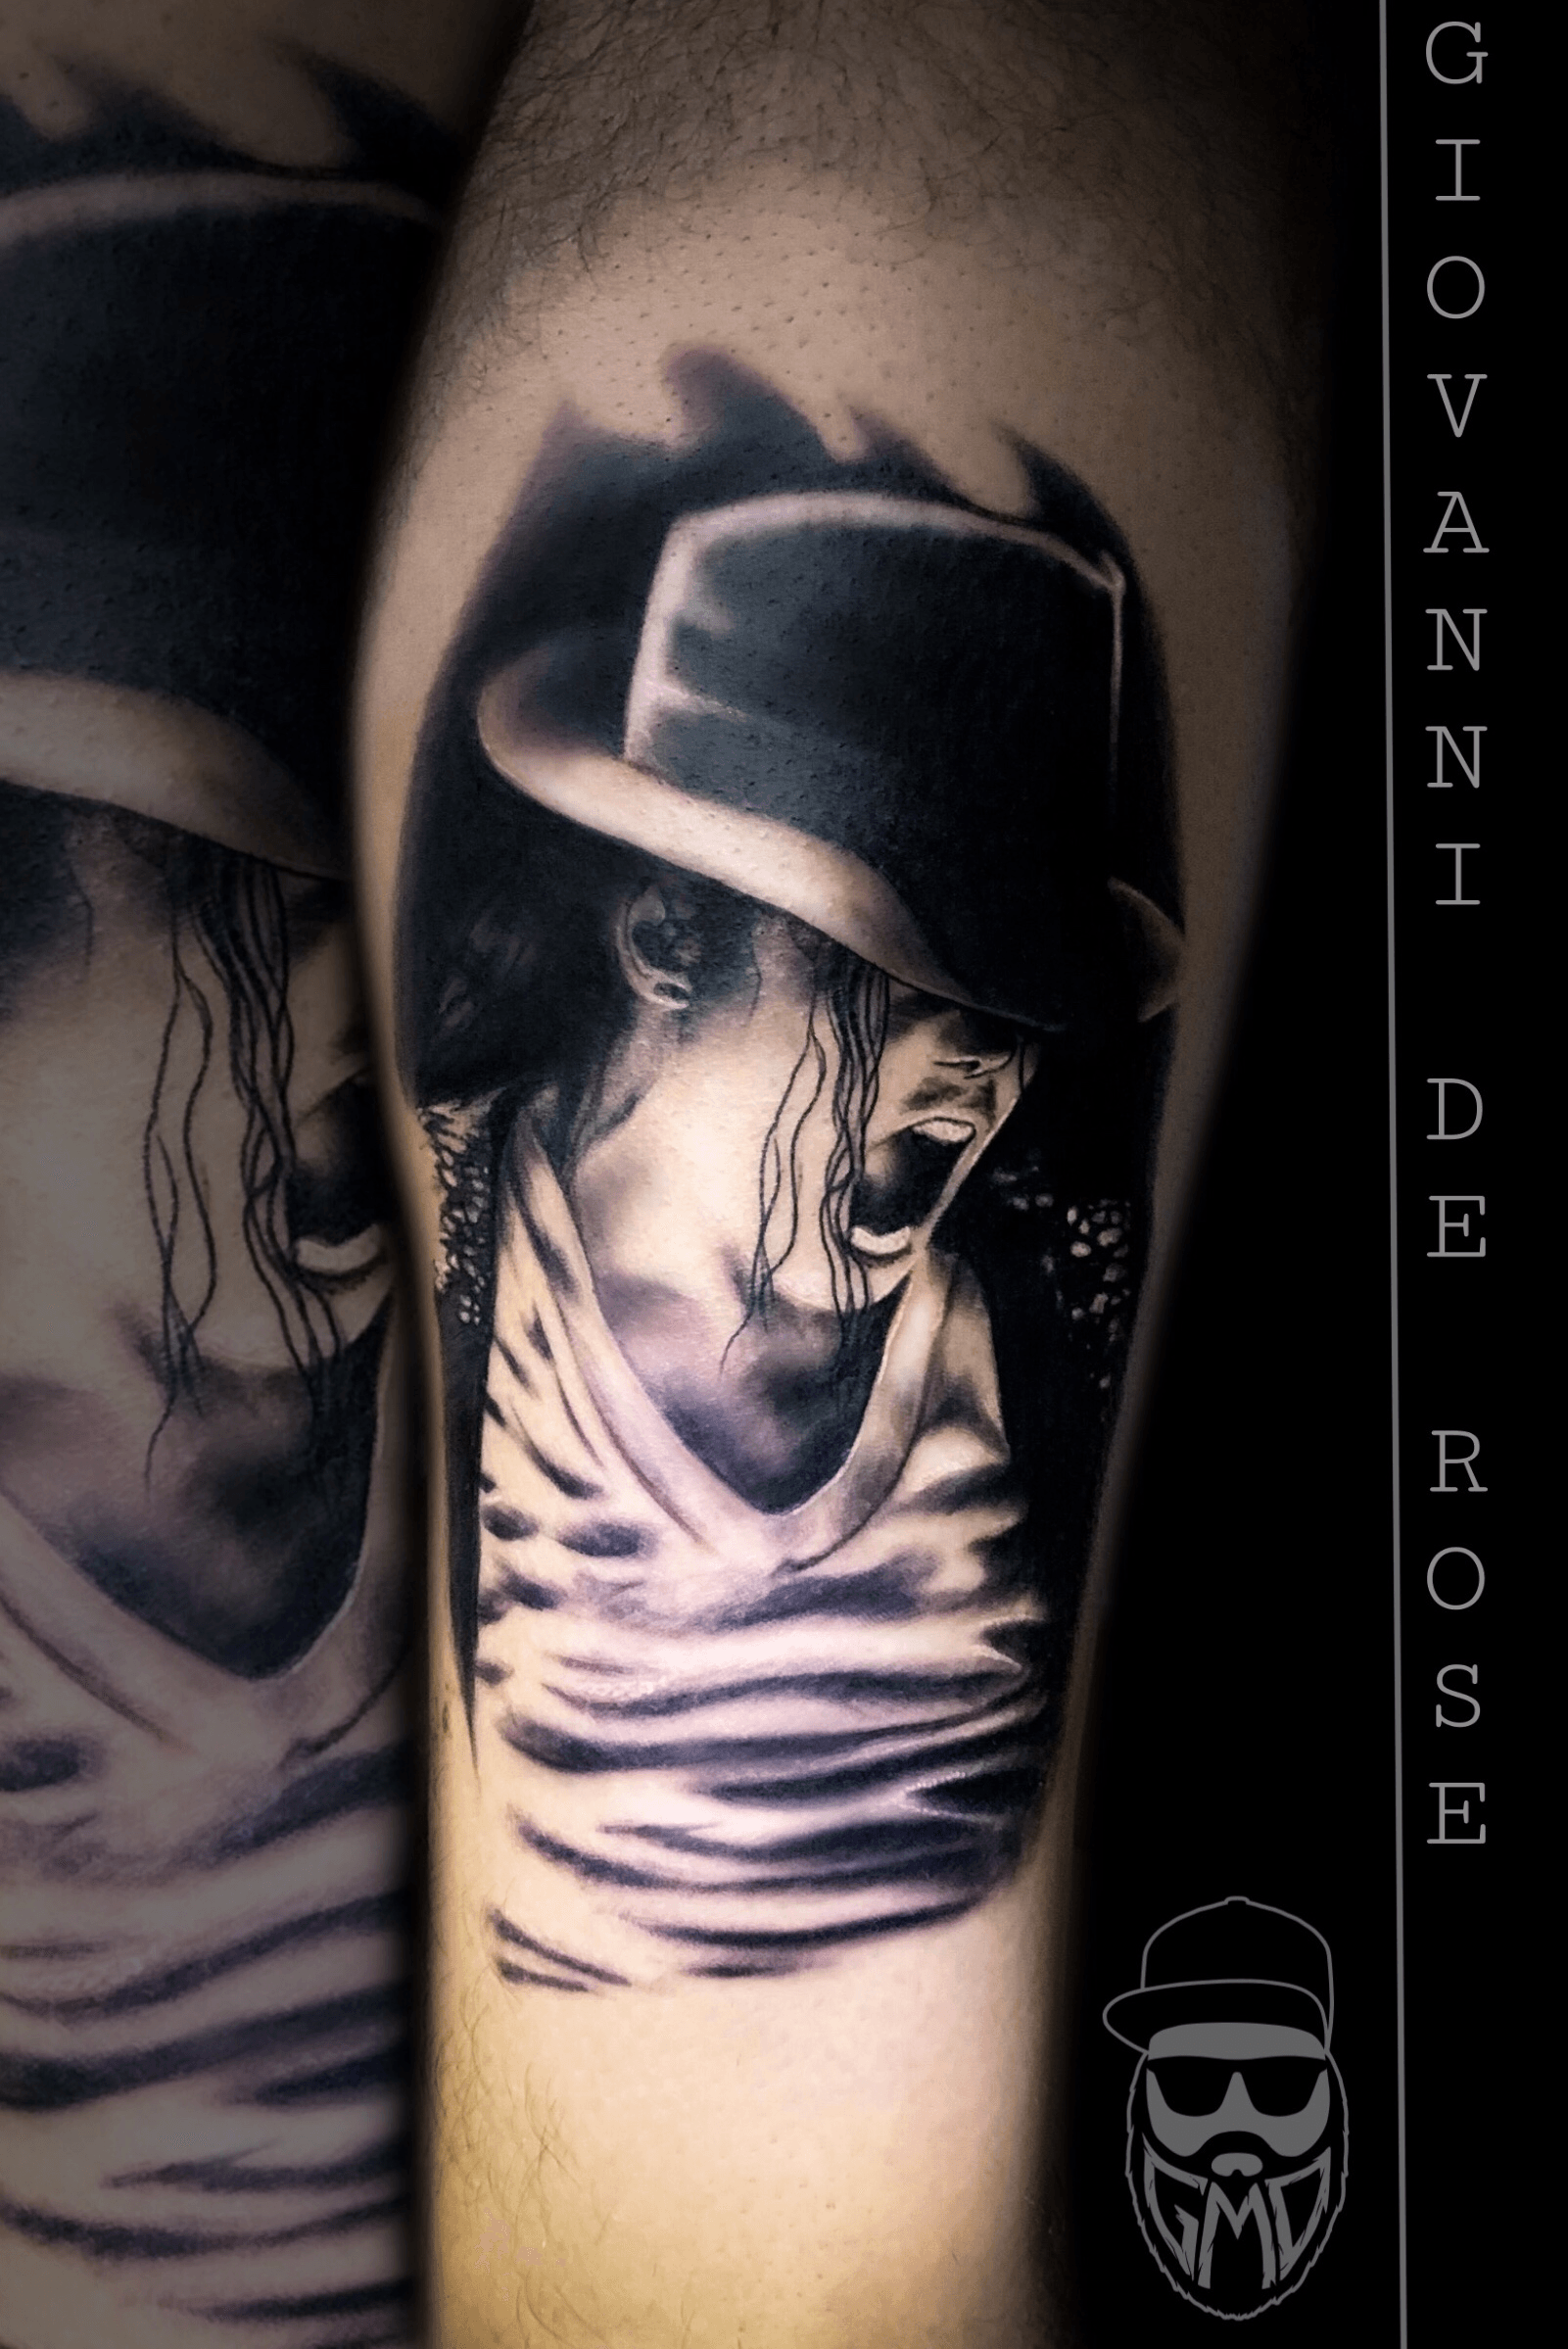 Tattoos inspired by Michael Jackson ღ in fans who love him  by  carlamartinsmj  Michael jackson tattoo Michael jackson art Paris jackson  tattoo